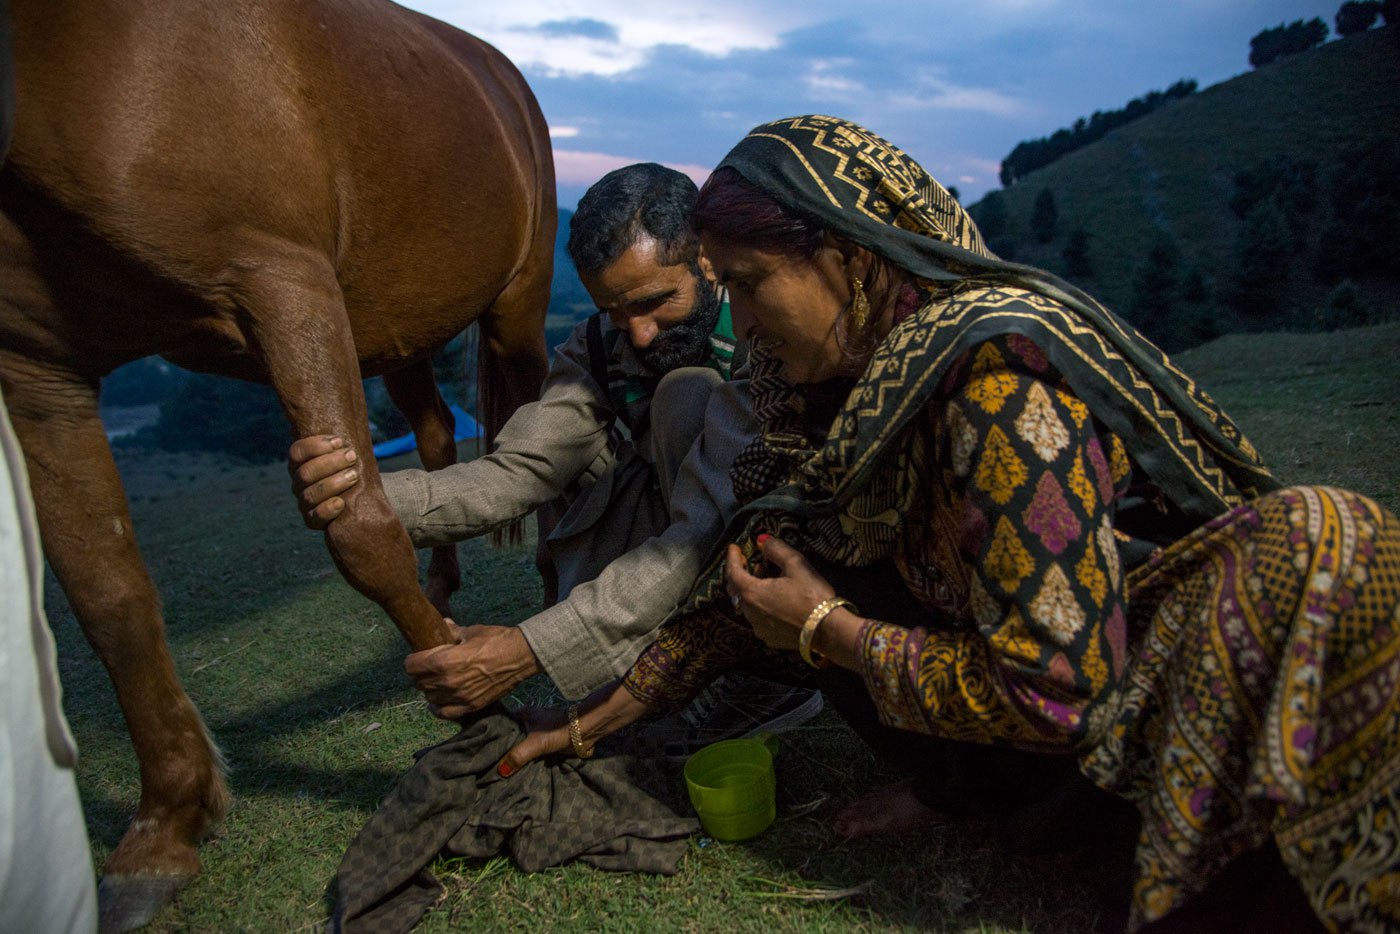 'We barely have access to veterinary doctors during migration. When an animal gets injured, we use our traditional remedies to fix it,' says Mohammed Zabir, seen here with his wife, Fana Bibi.